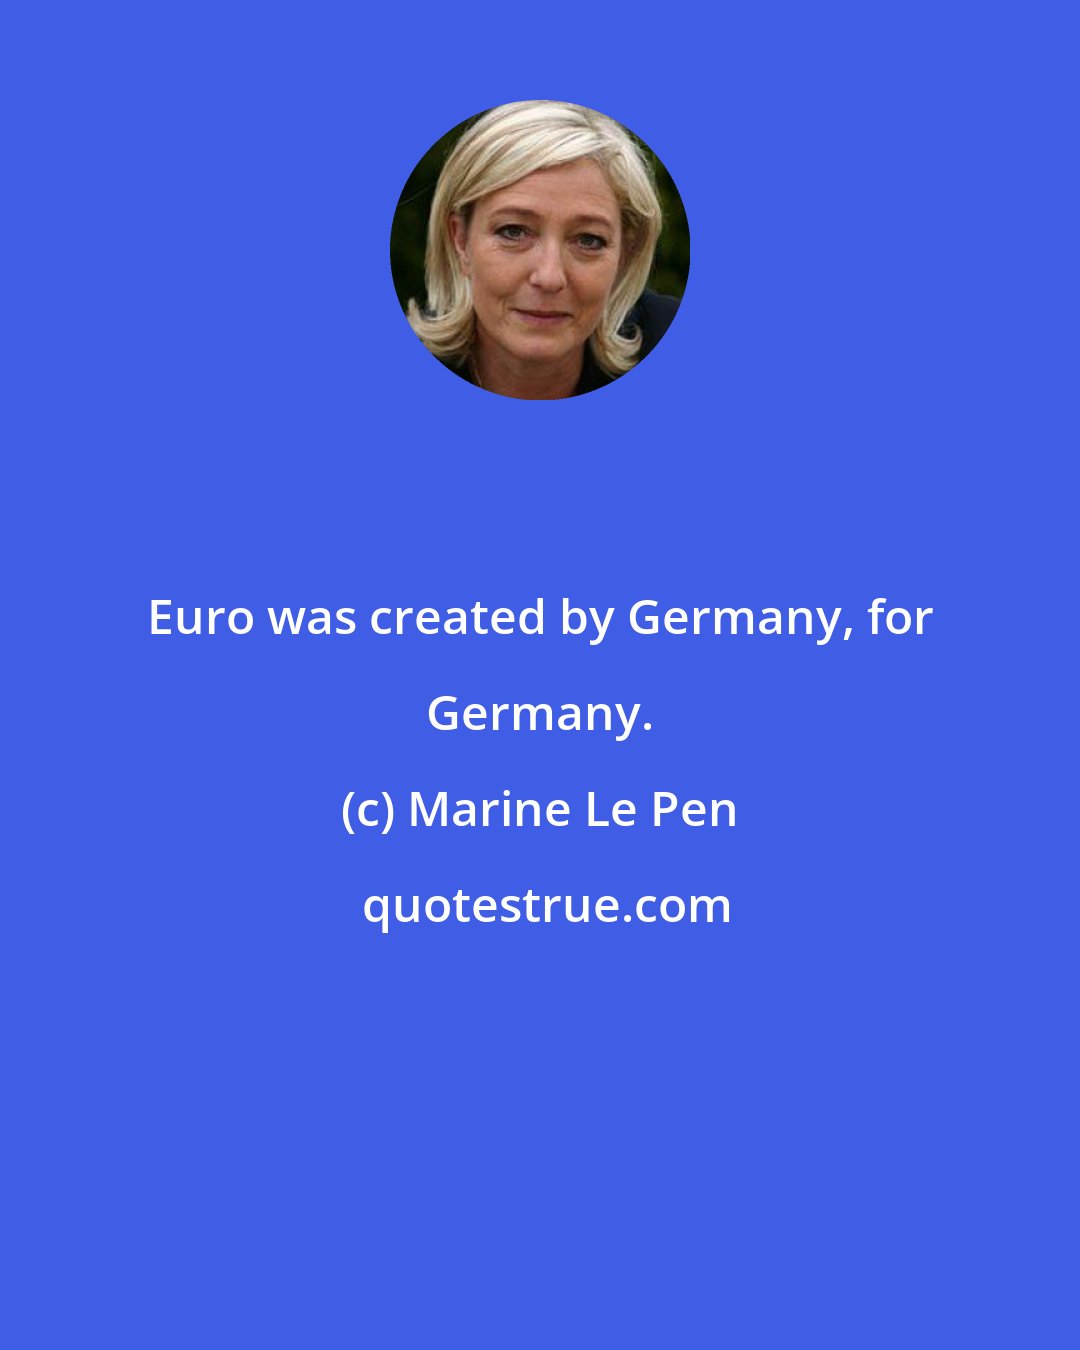 Marine Le Pen: Euro was created by Germany, for Germany.